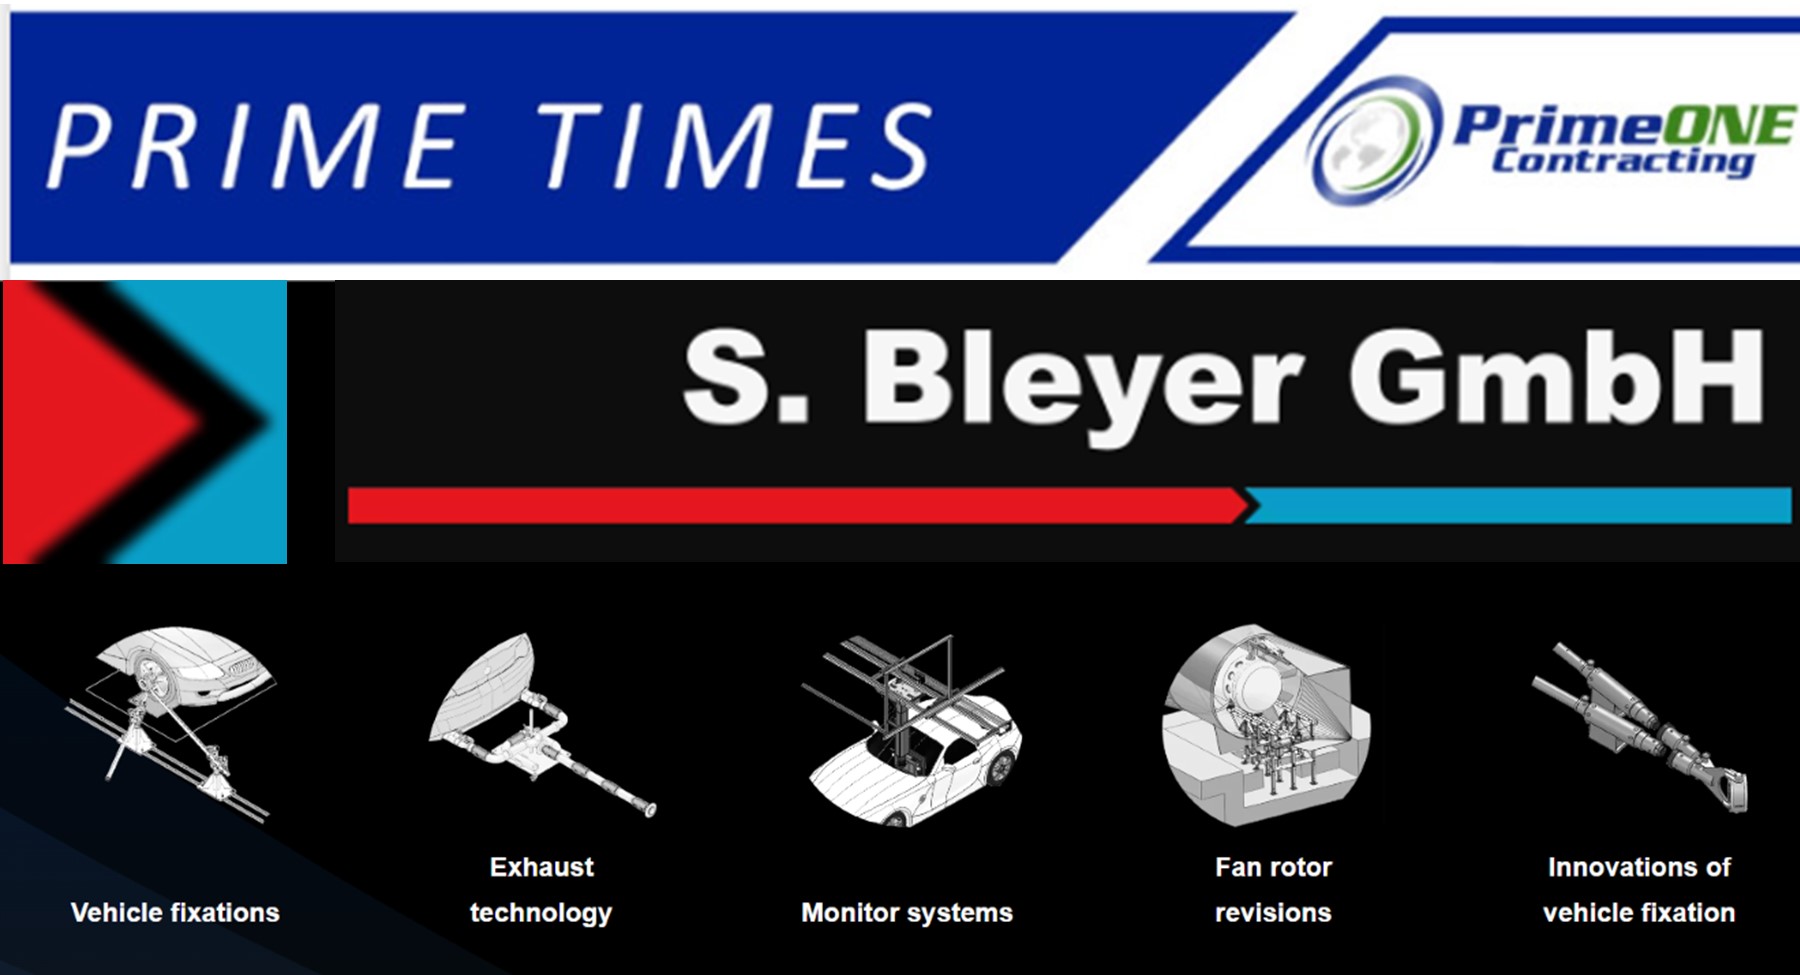 automotive test chamber accessories, chassis dynamometers, S. Bleyer, GmBH, Prime ONE Contracting